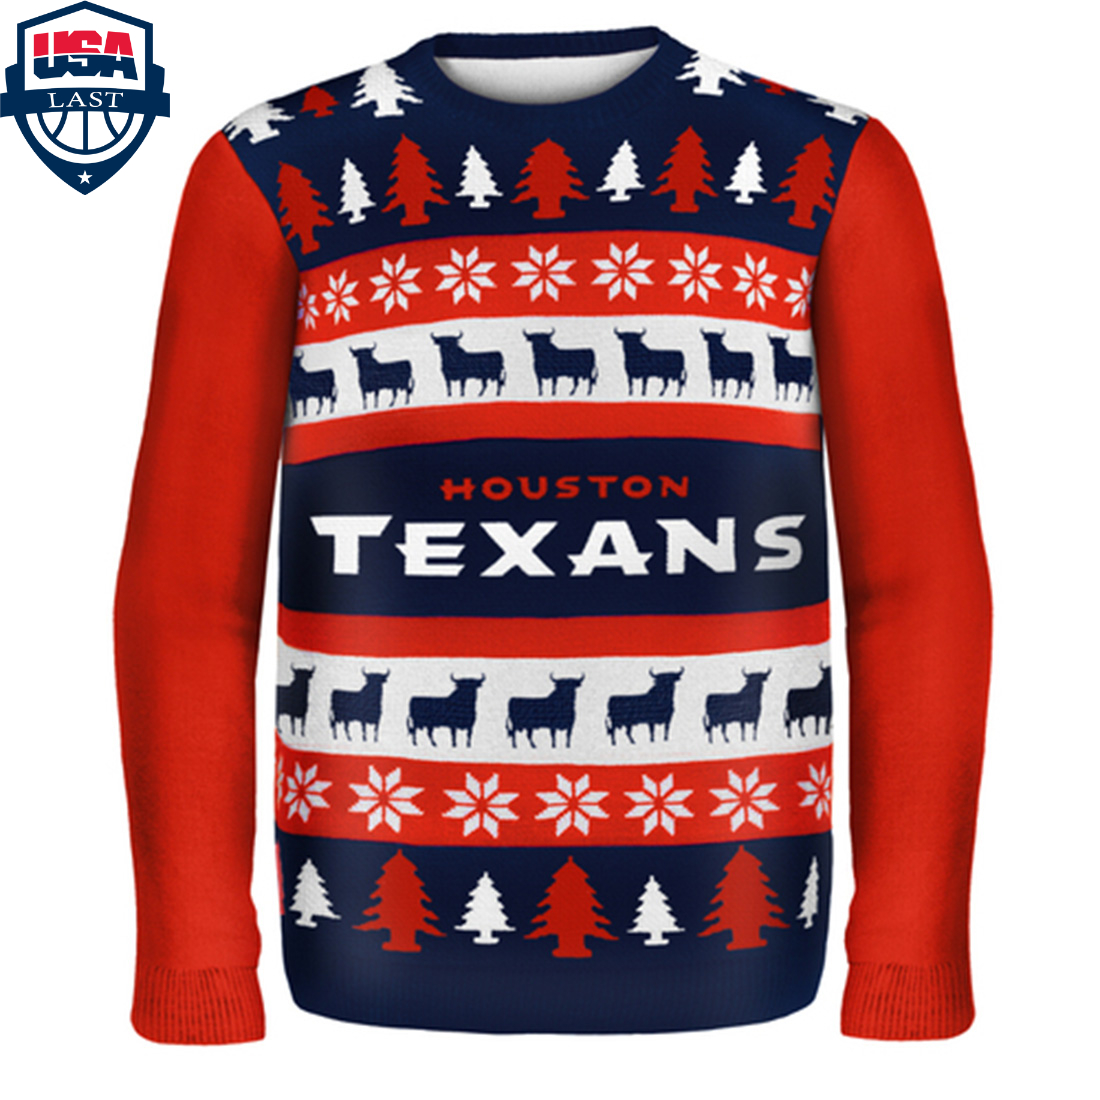 Houston-Texans-NFL-Ugly-Sweater